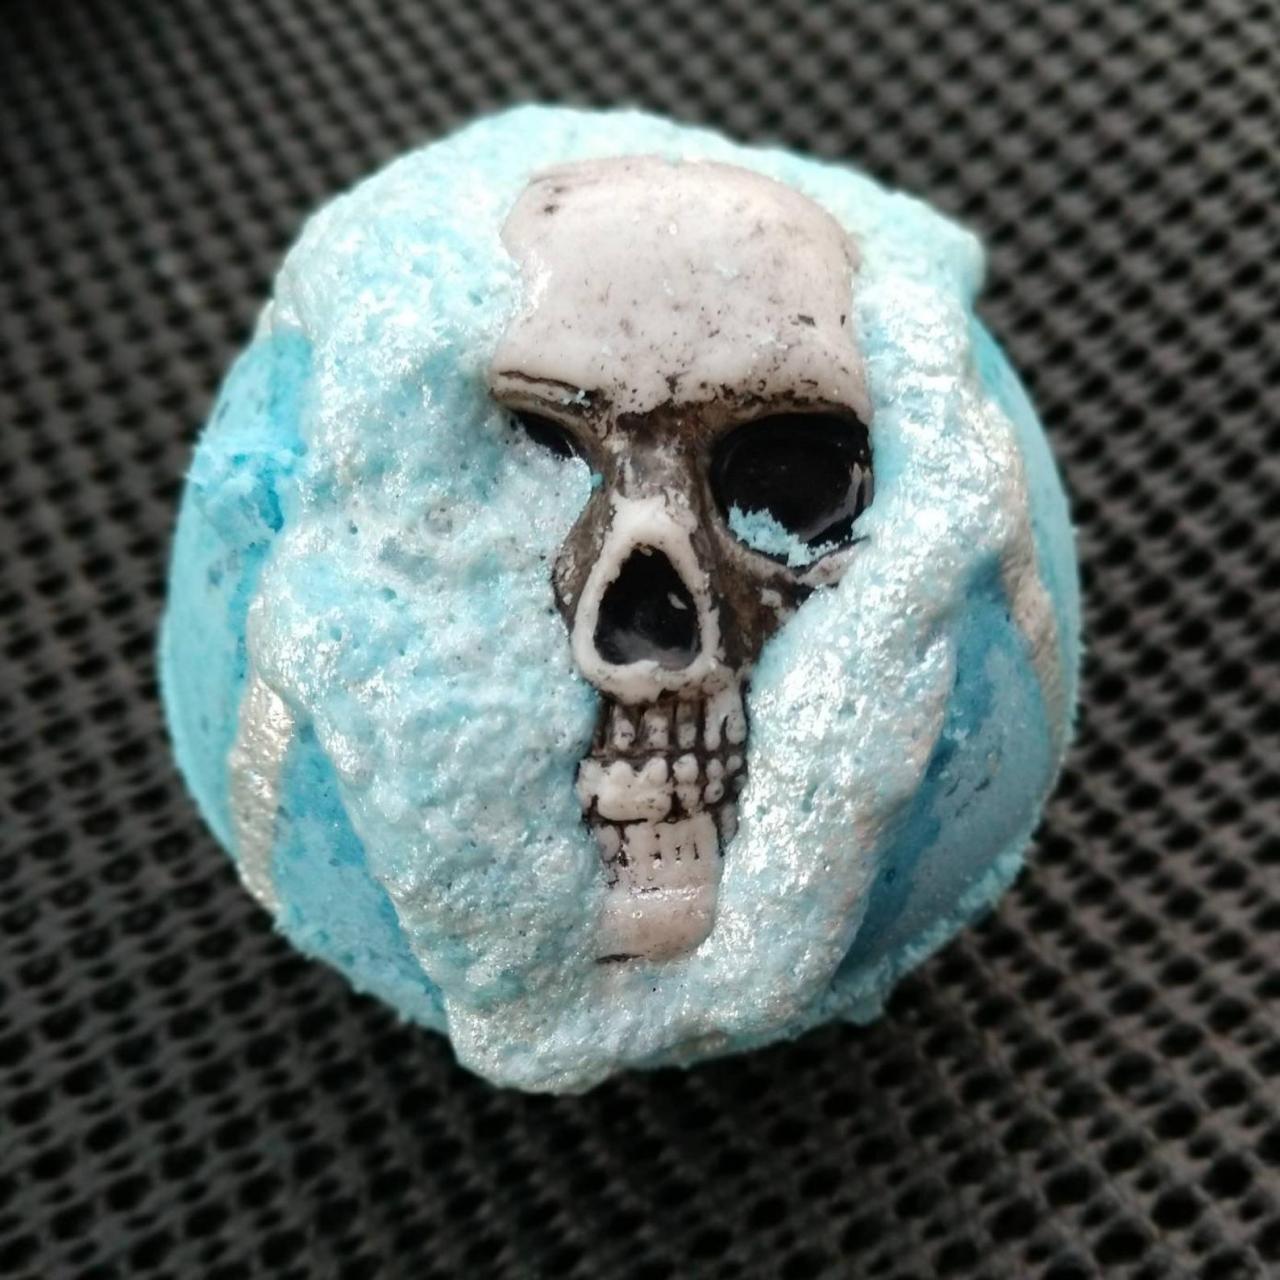 Cedarwood peppermint bath bombs with or without skull toy